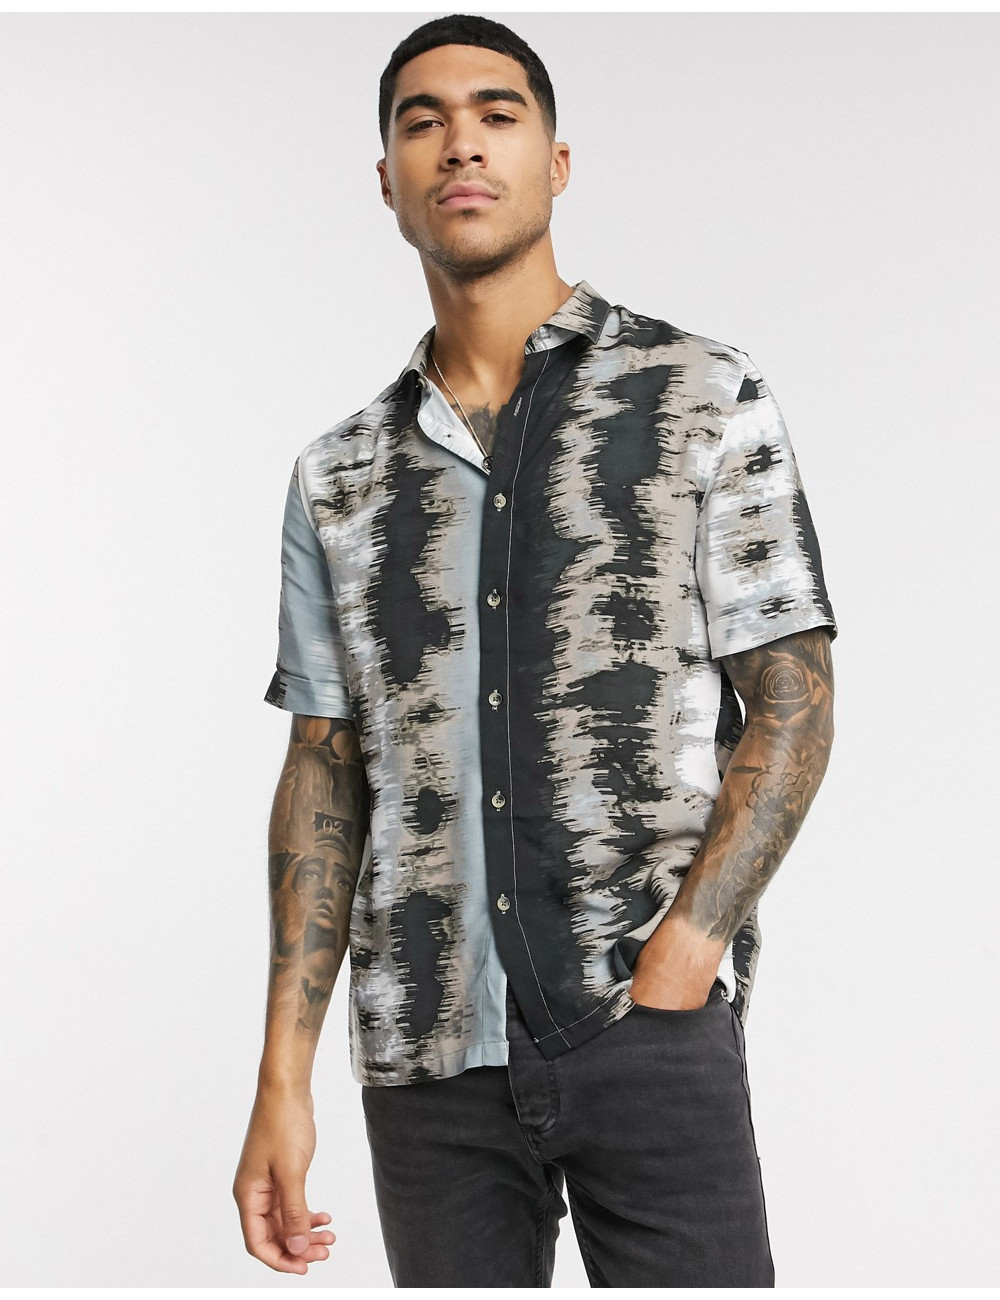 River Island shirt with...